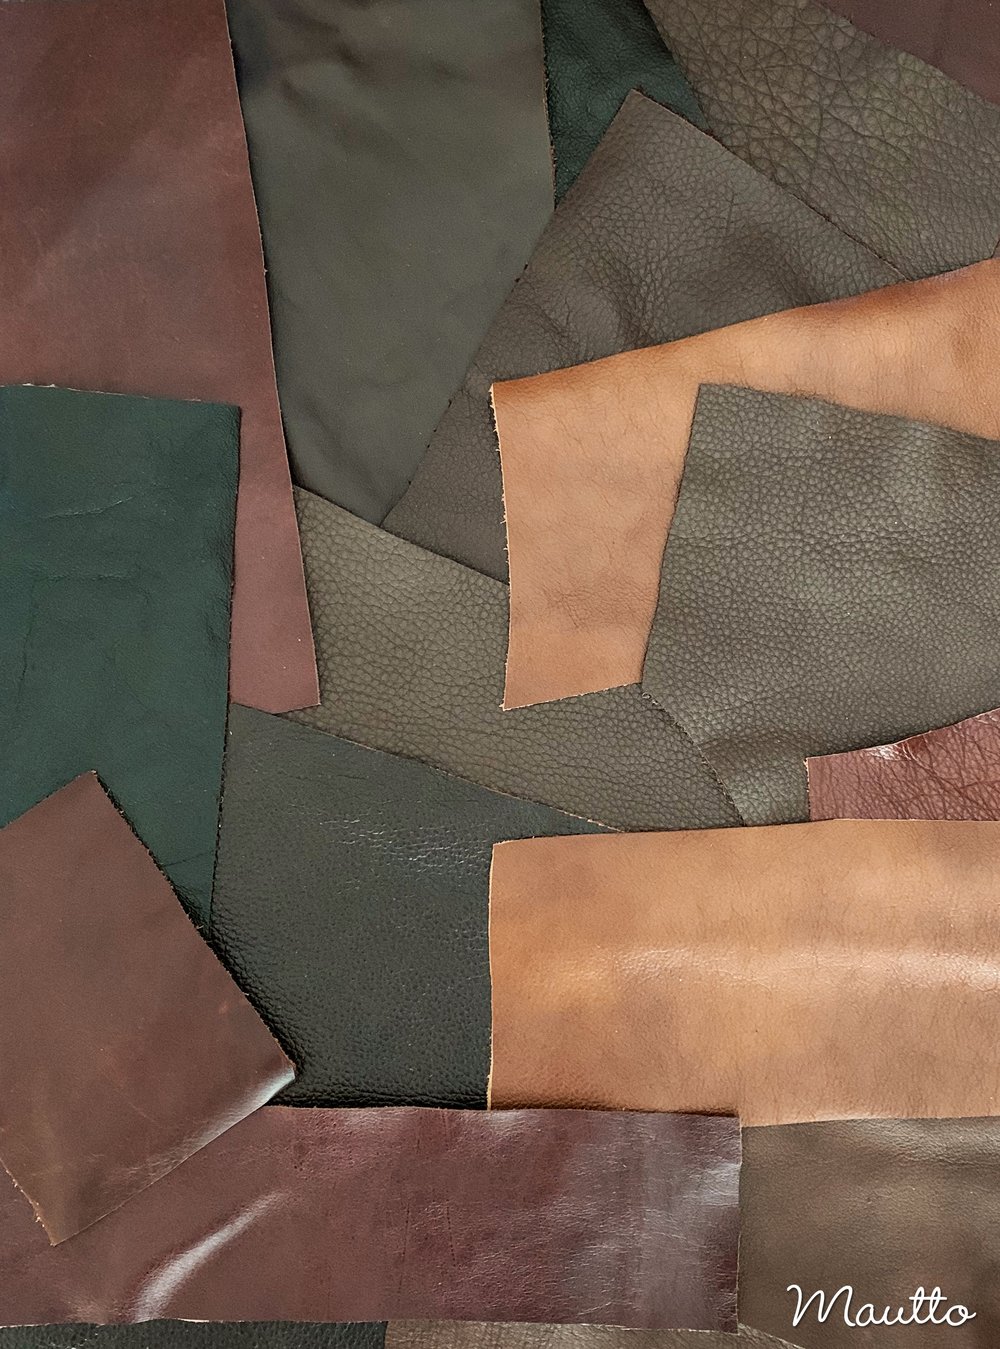 Image of Brown Leather Pieces - 1 Pound Bag of Scraps & Remnants - for Crafts, Art, DIY Projects, Jewelry